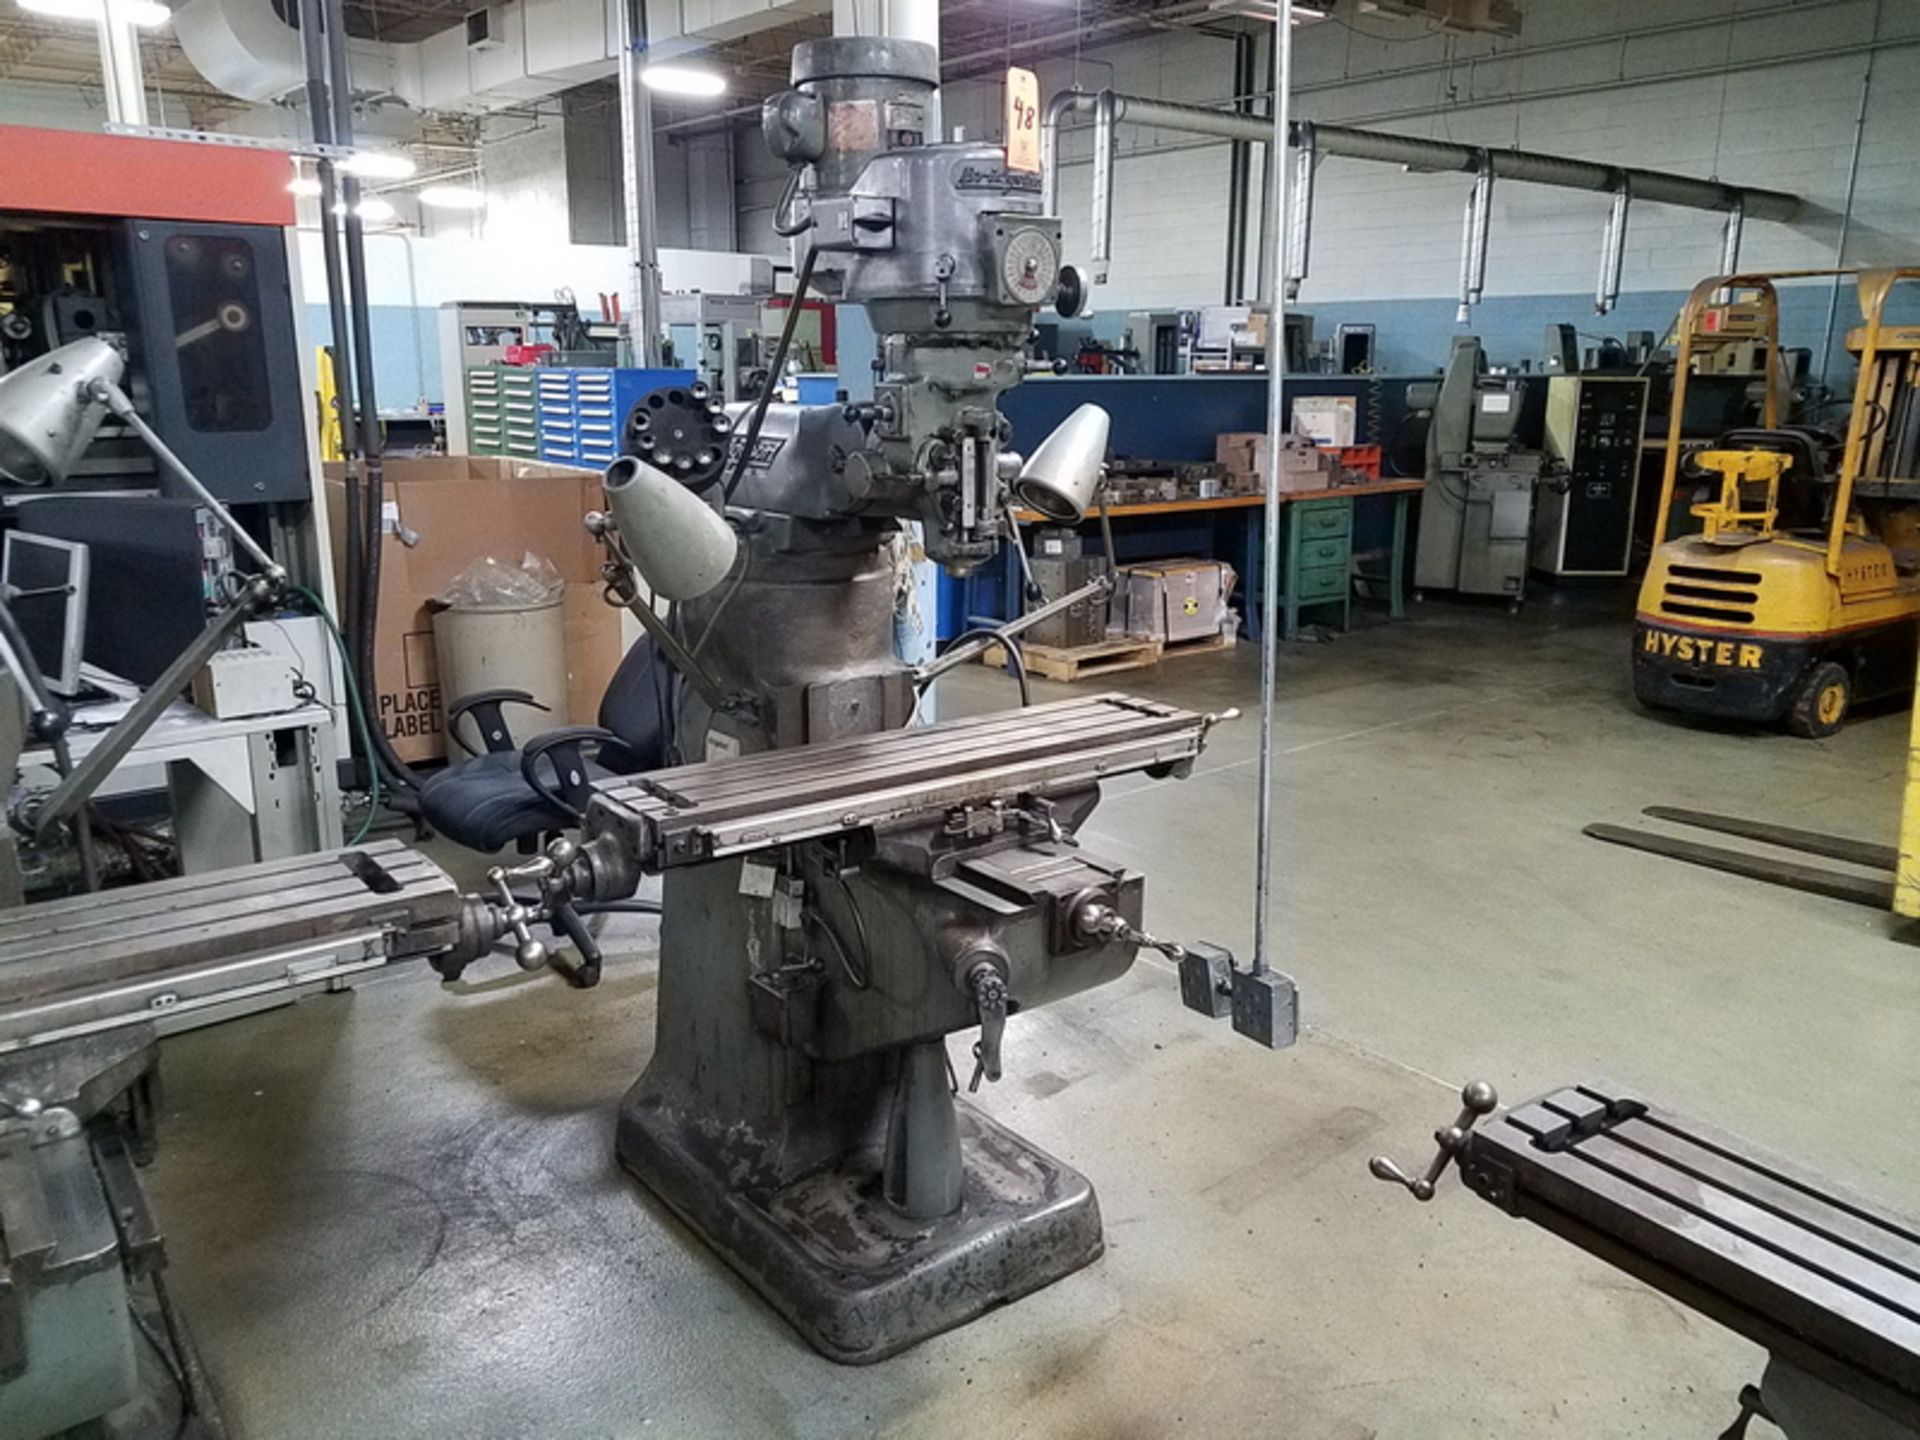 Bridgeport 1-1/2 HP Vertical Milling Machine, S/N: 167856; with R8 Spindle, 5 in. Quill